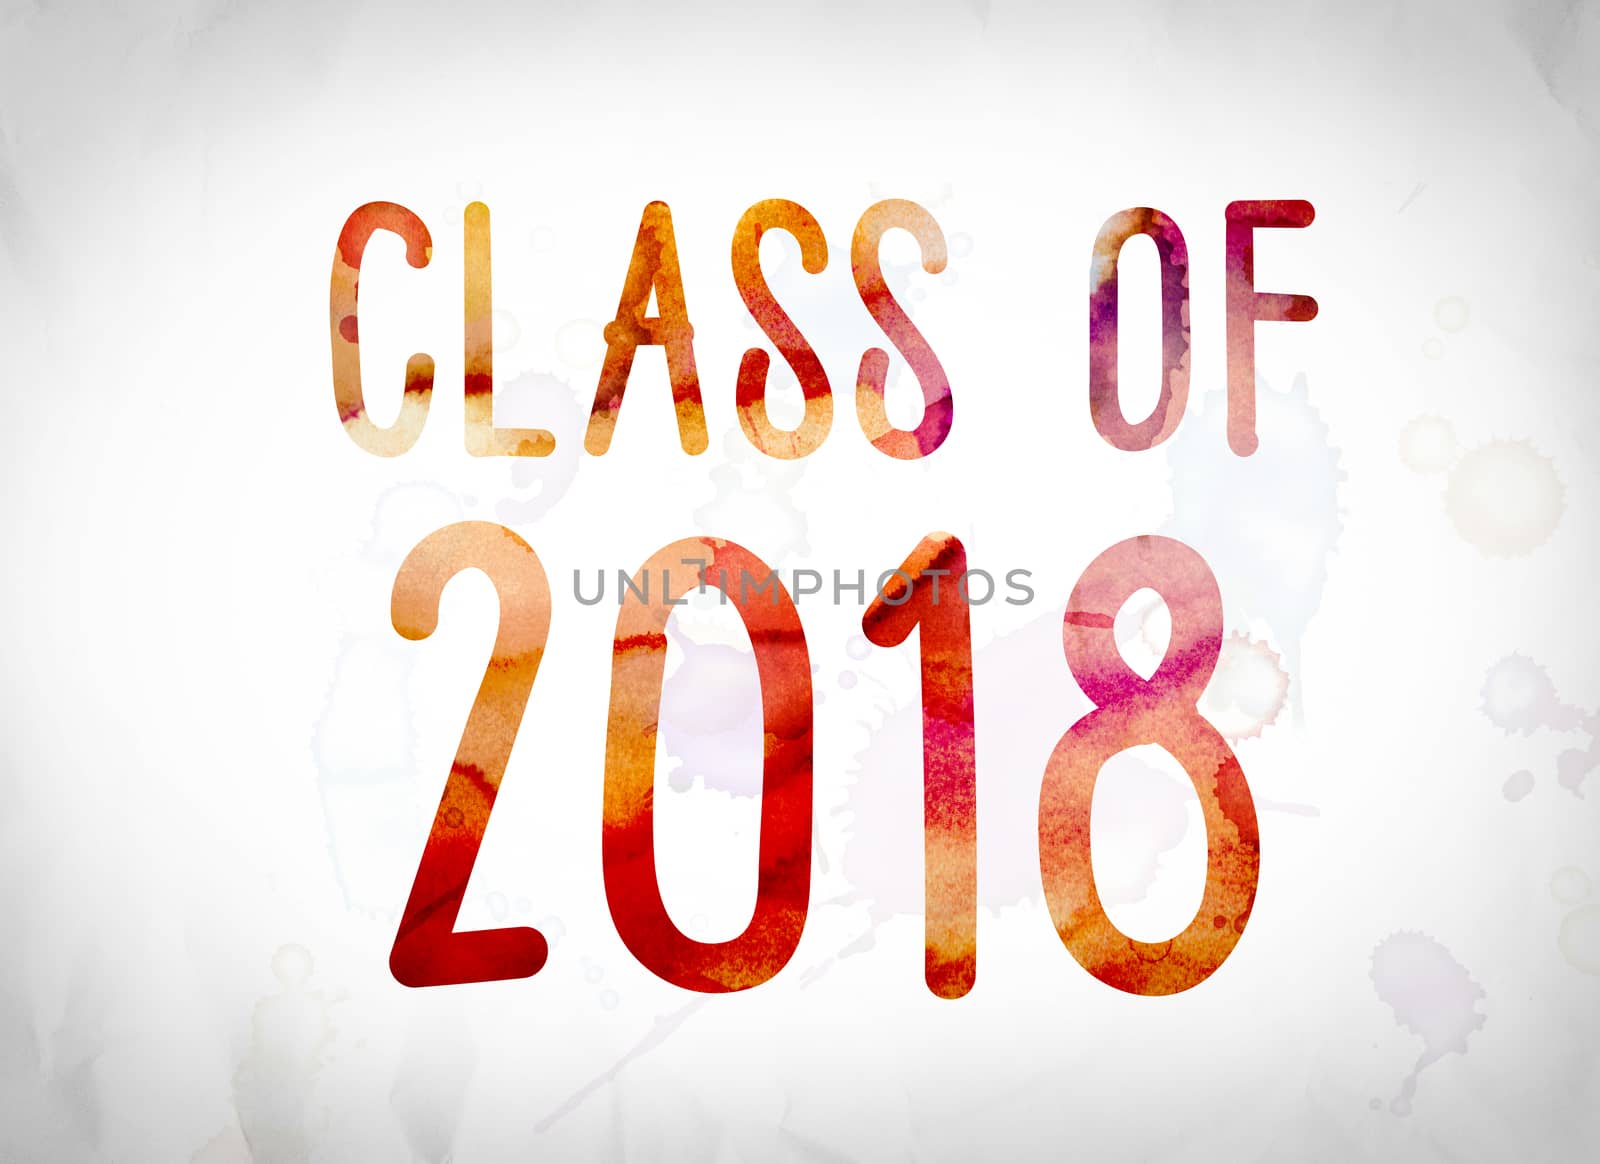 The word "Class of 2018" written in watercolor washes over a white paper background concept and theme.